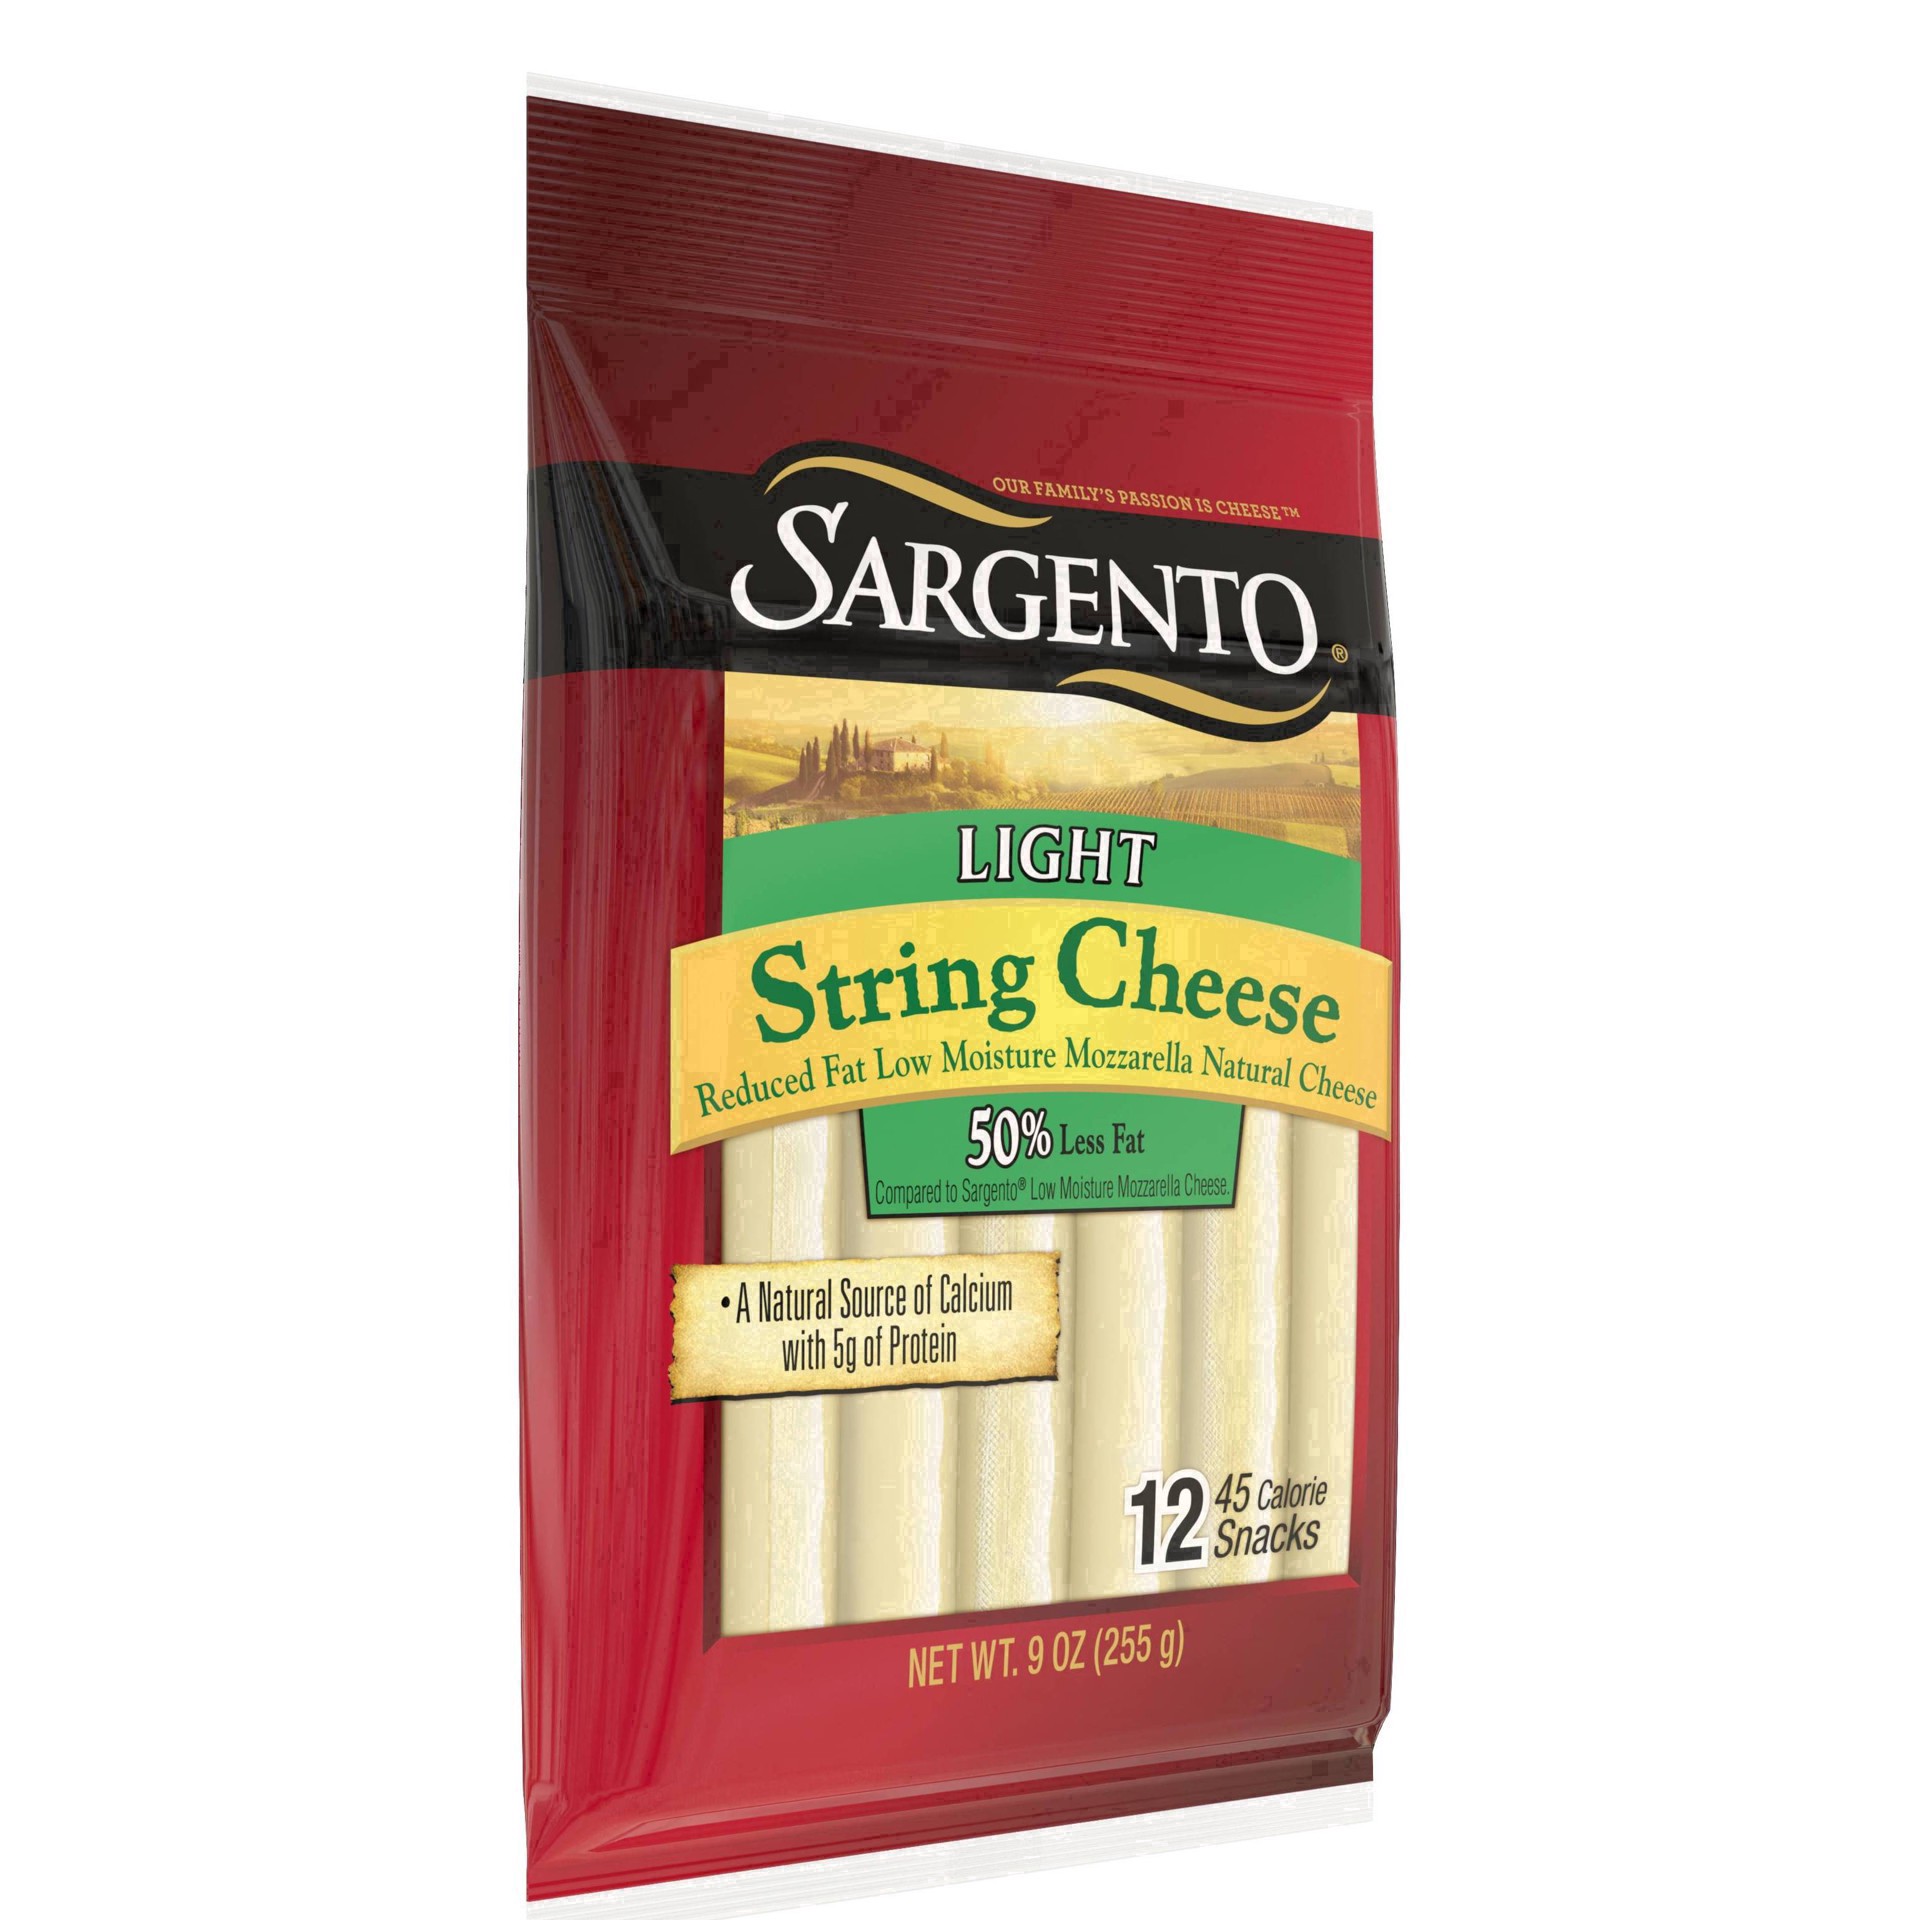 slide 22 of 62, Sargento Reduced Fat Low Moisture Part-Skim Mozzarella Natural Cheese Light String Cheese Snacks, 9 oz., 12-Count, 9 oz